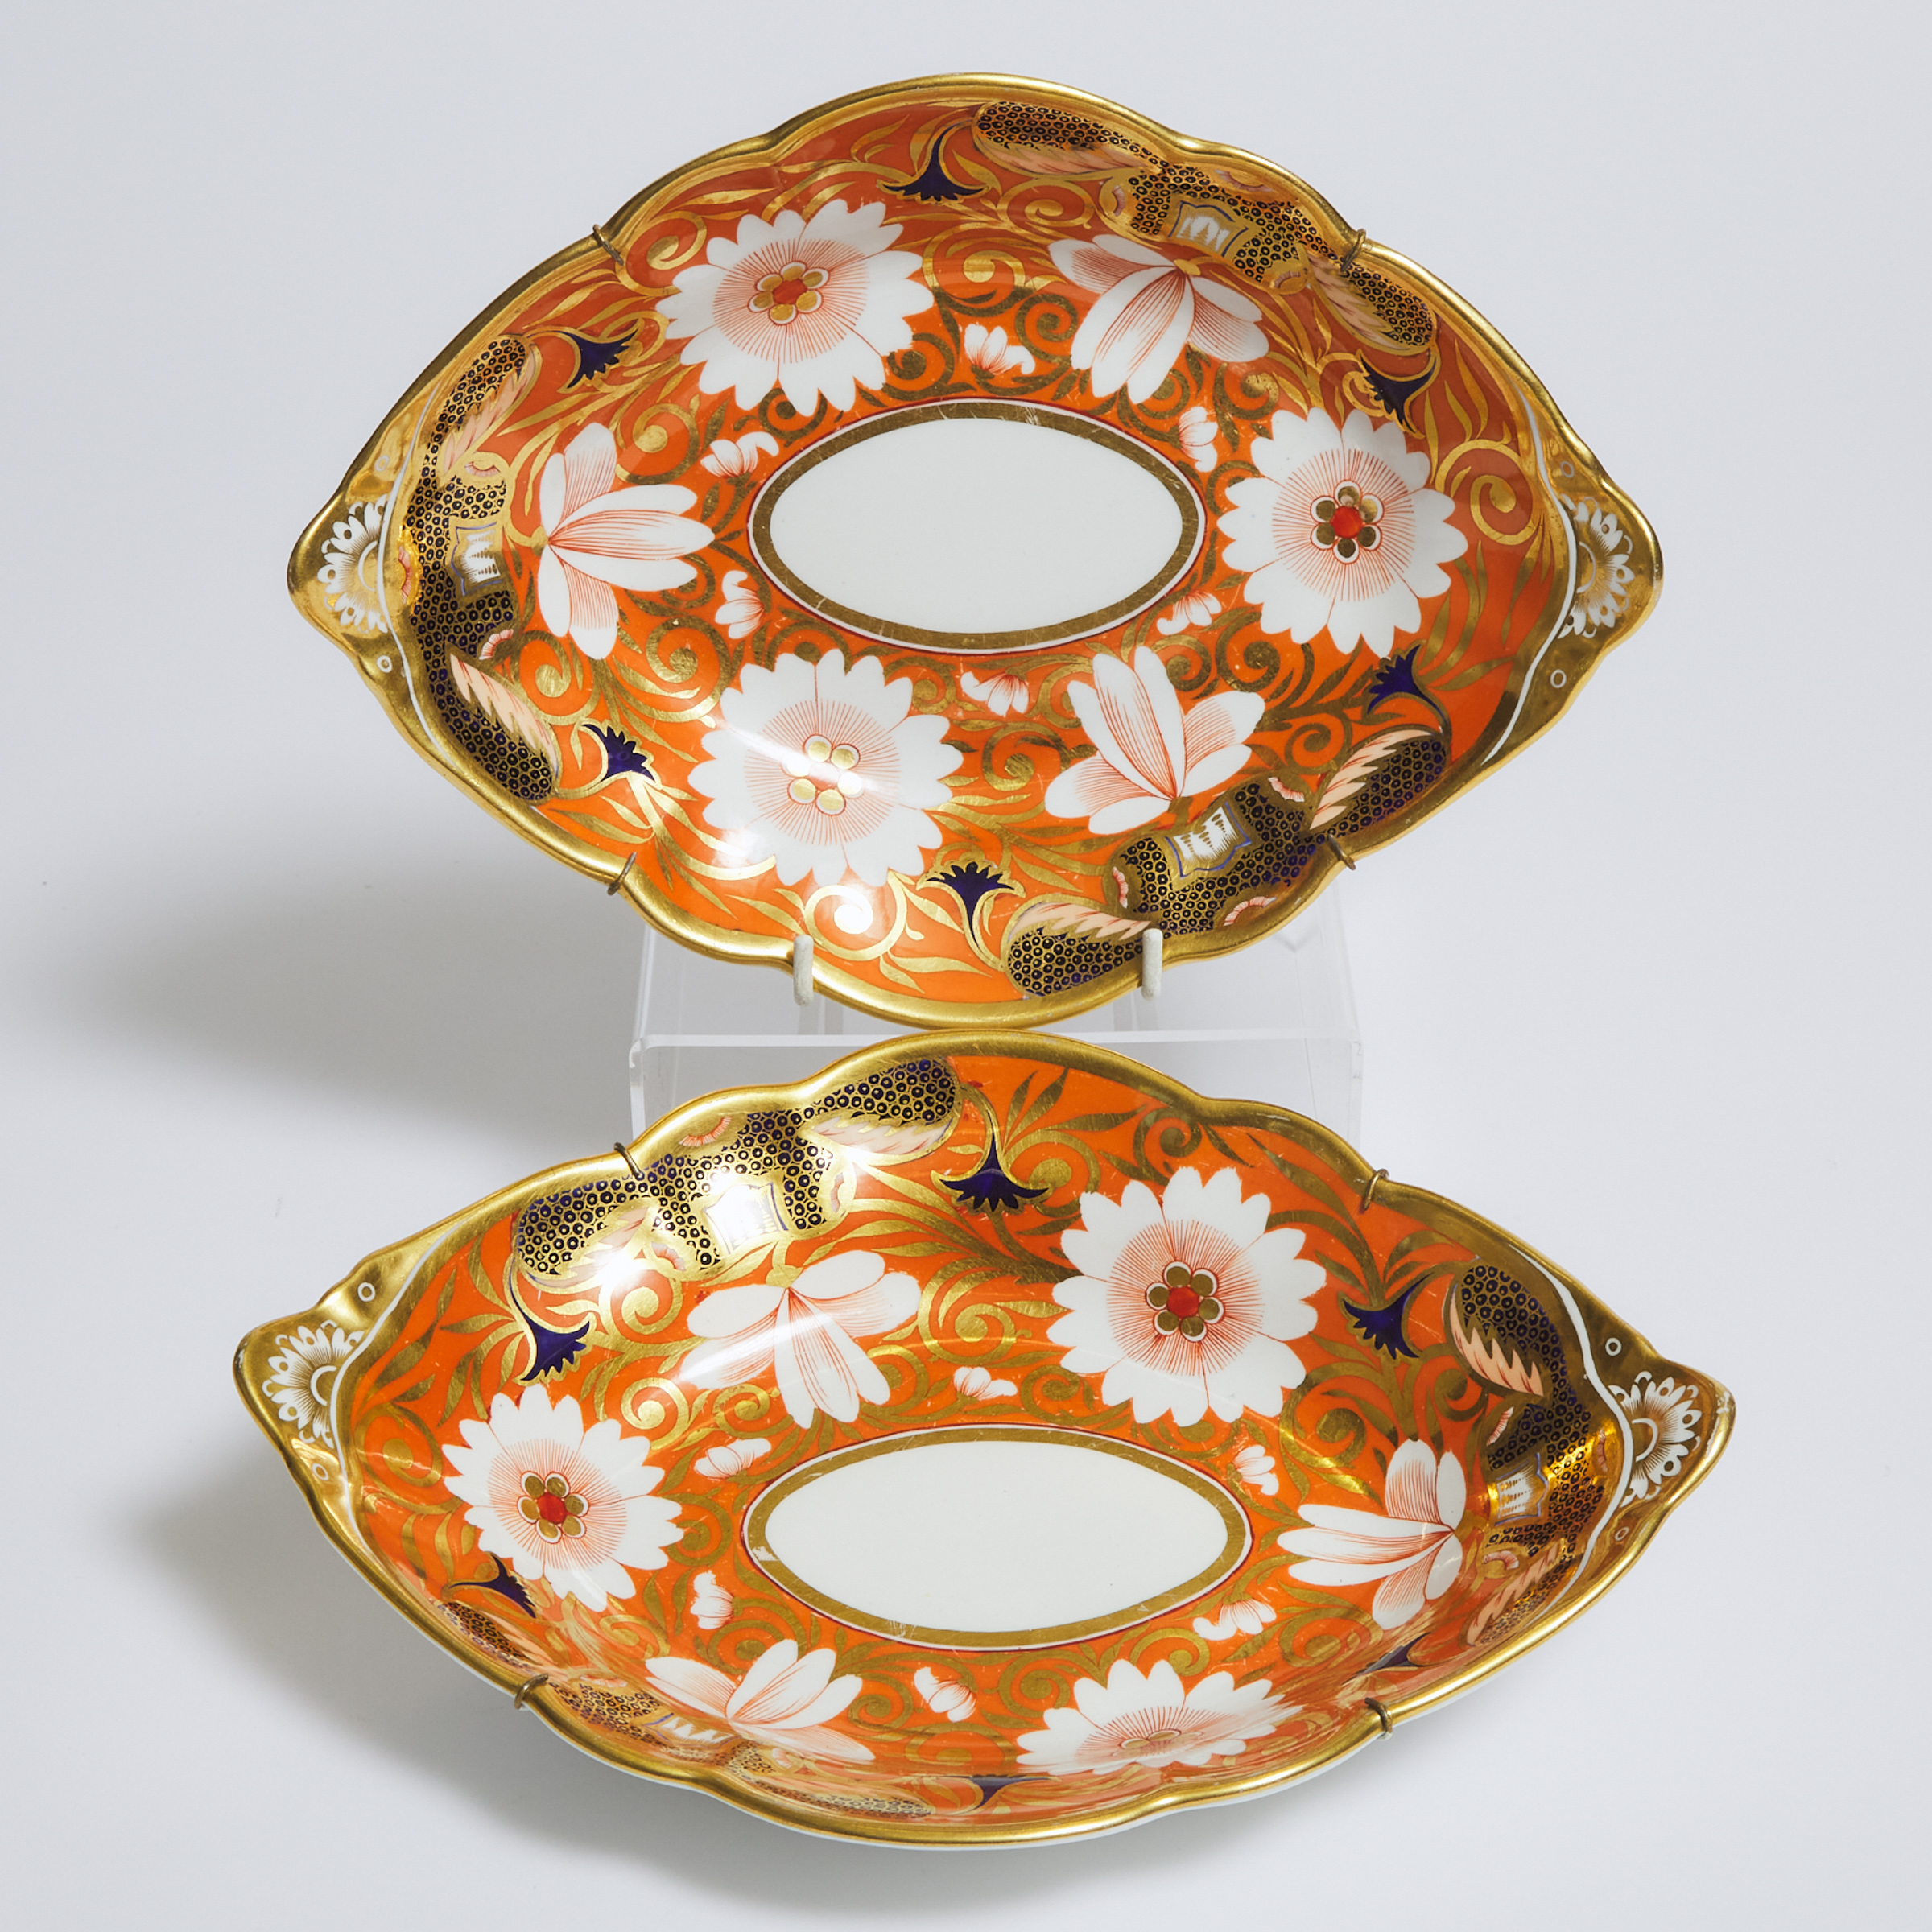 Pair of Spode Japan Pattern Oval Dishes, c.1810